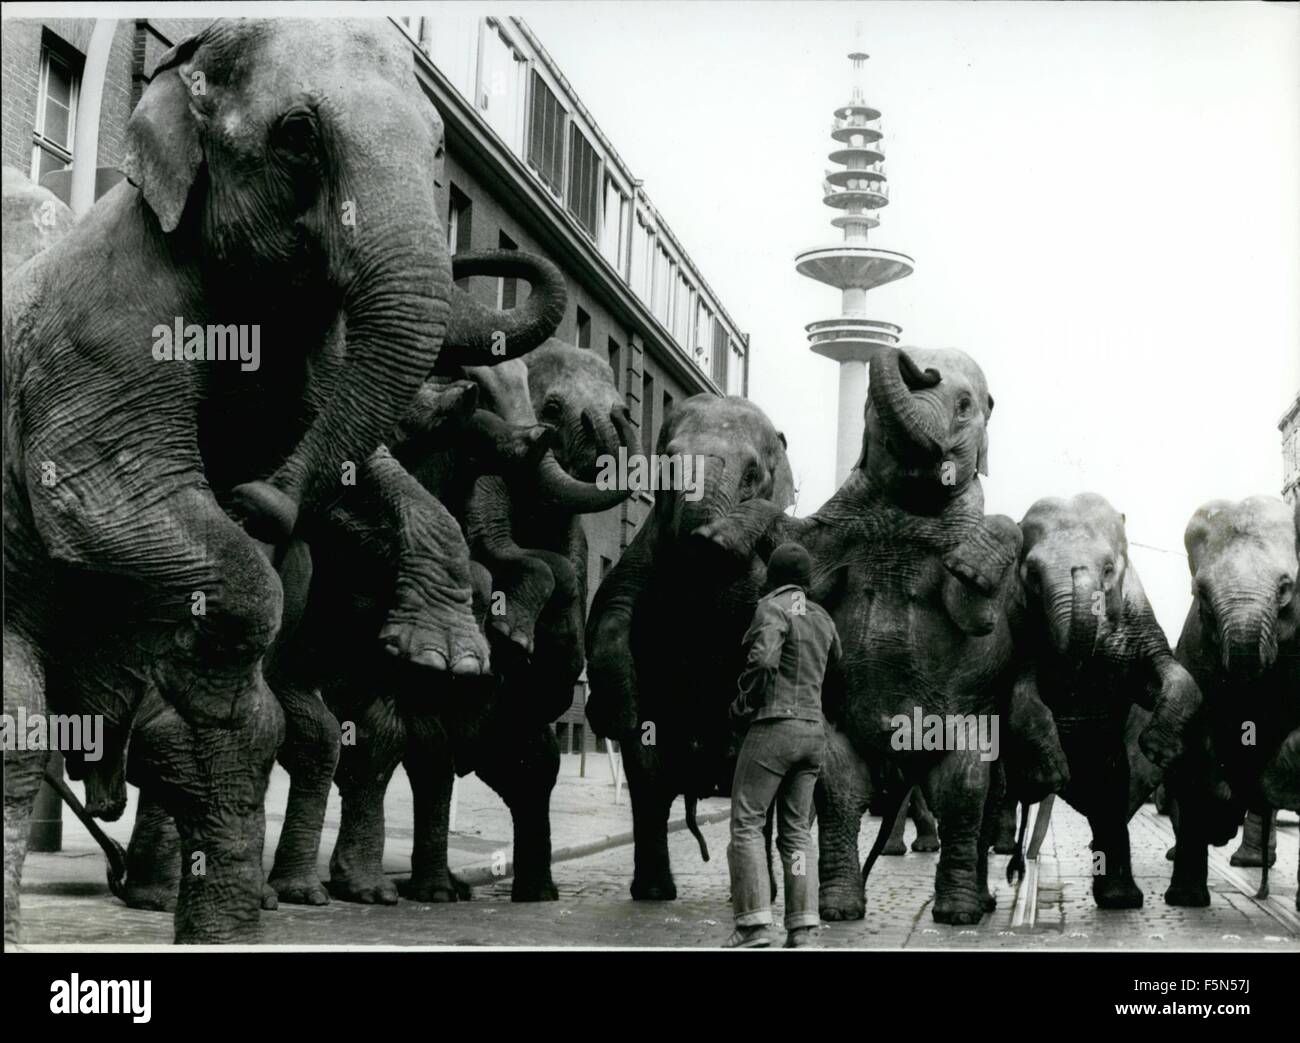 1980 - ''American Circus'' In Hamburg/West-Germany: A small proof of their artistic possibilities have been giving the pachyderms of the famous ''American Circus'', on their way to their tent site, after arriving in Hamburg/West Germany. Willingly the elephants adjusted to the traffic, being guided by their trainer Flavio Togni, who is only 19 years old, but already has been honoured by the ''Silver Clown of Monte Carlo''. Even the most busy drivers stopped for a moment, when the animals were making publicity for their circus. The ''American Circus'', being on guest performances throughout Eur Stock Photo